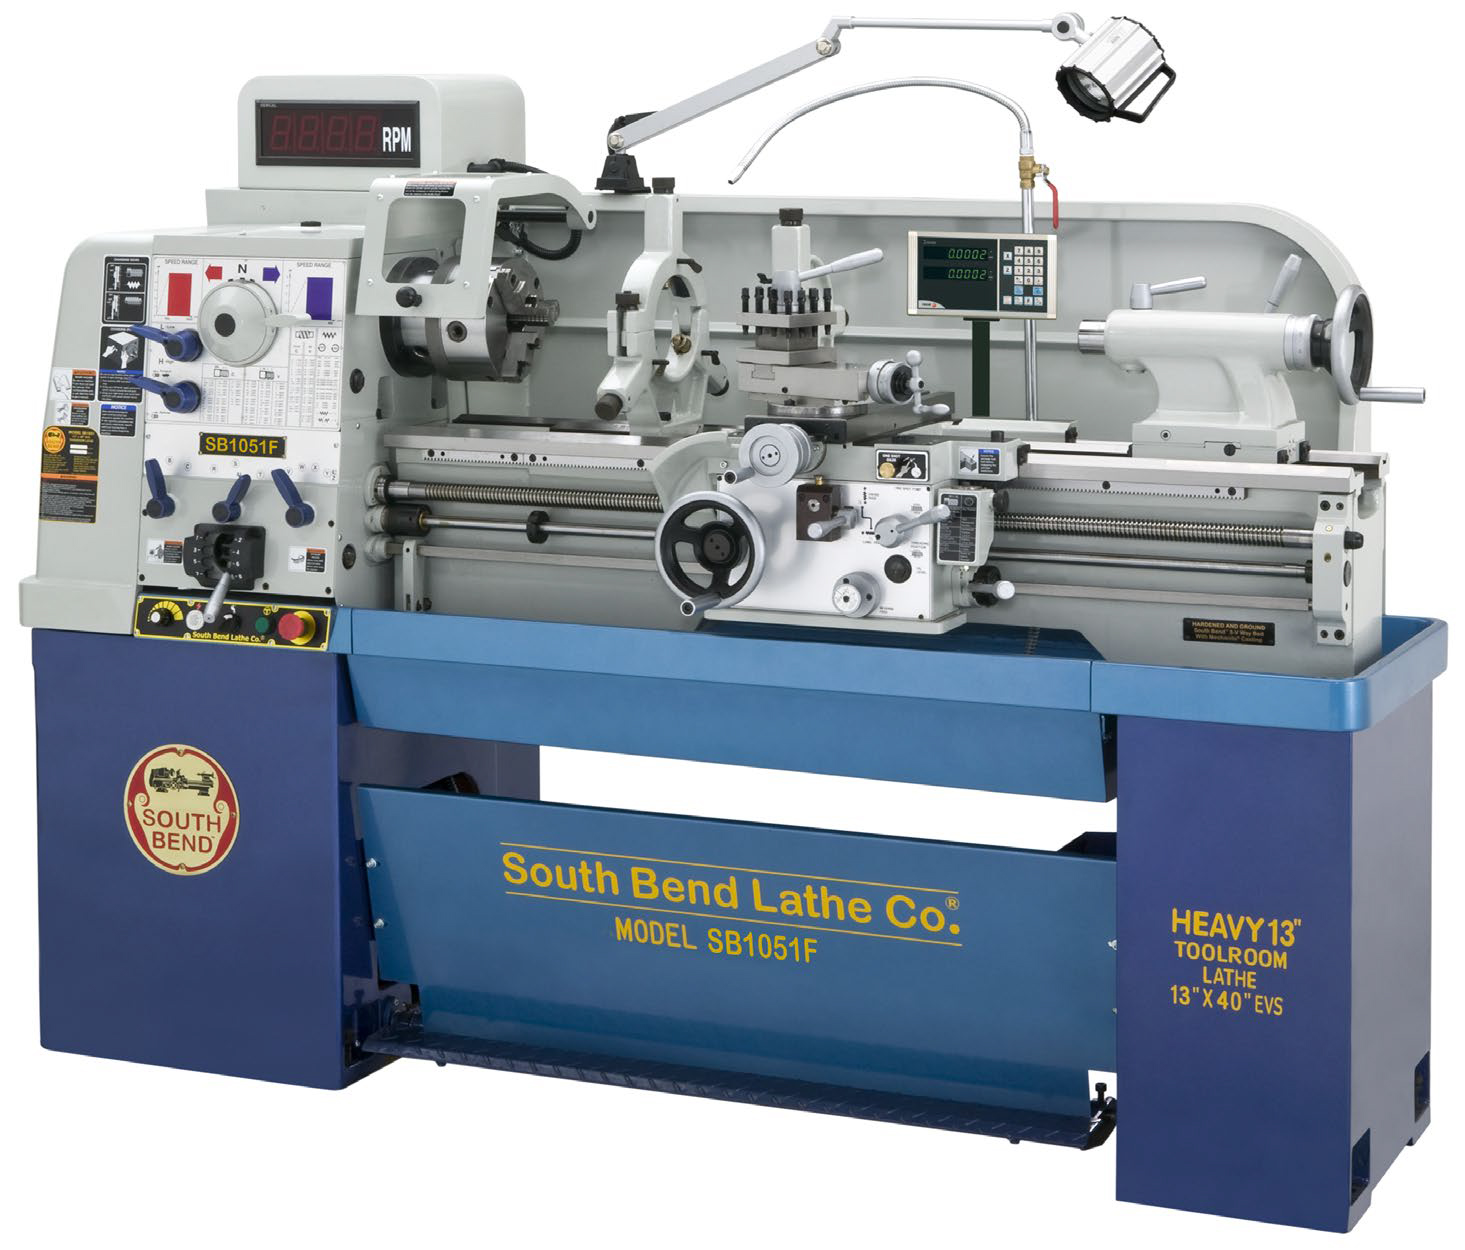 South Bend Lathe: New EVS Lathe with Fagor DRO